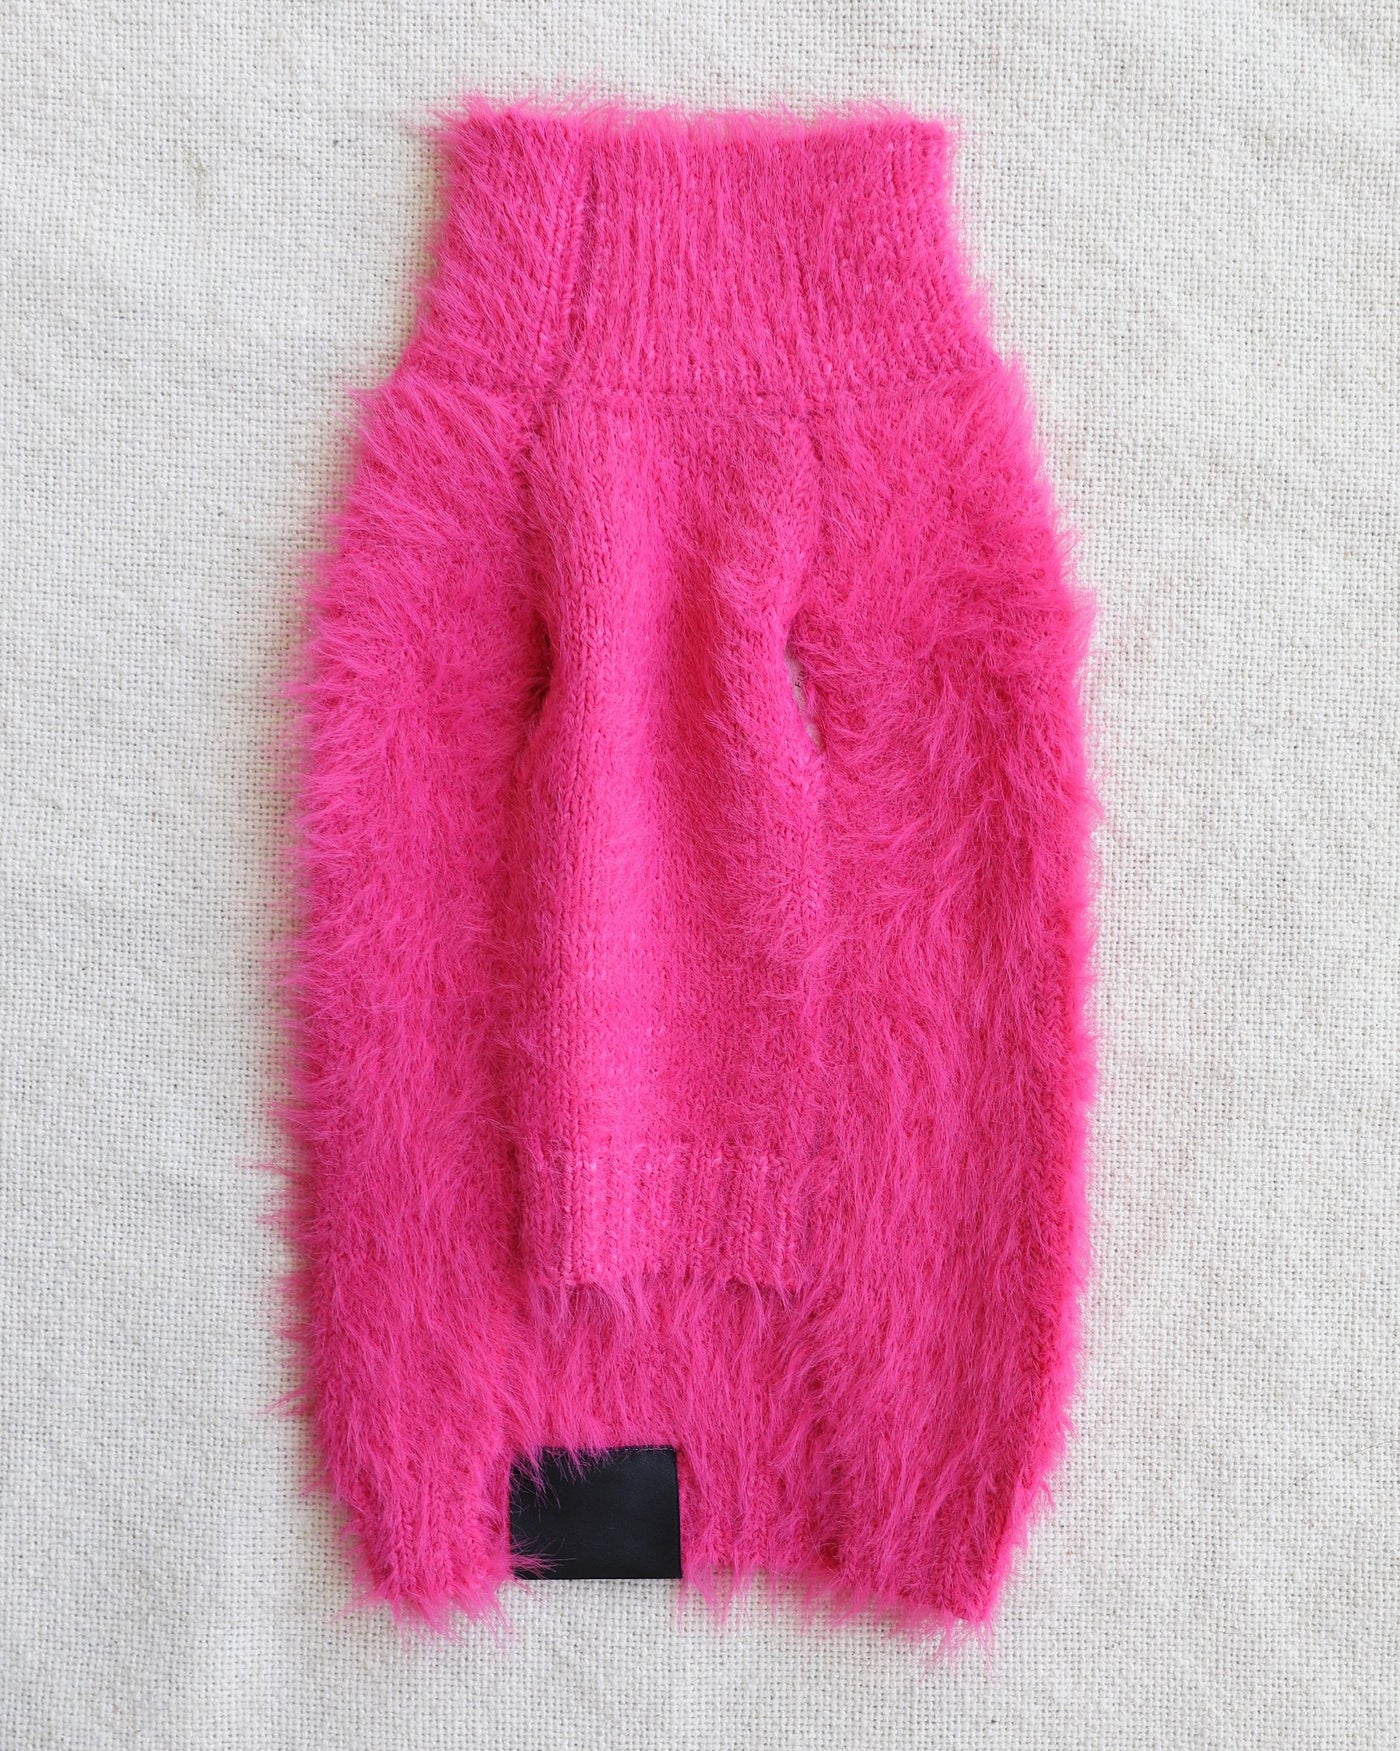 Fluffy hot pink dog sweater on white background